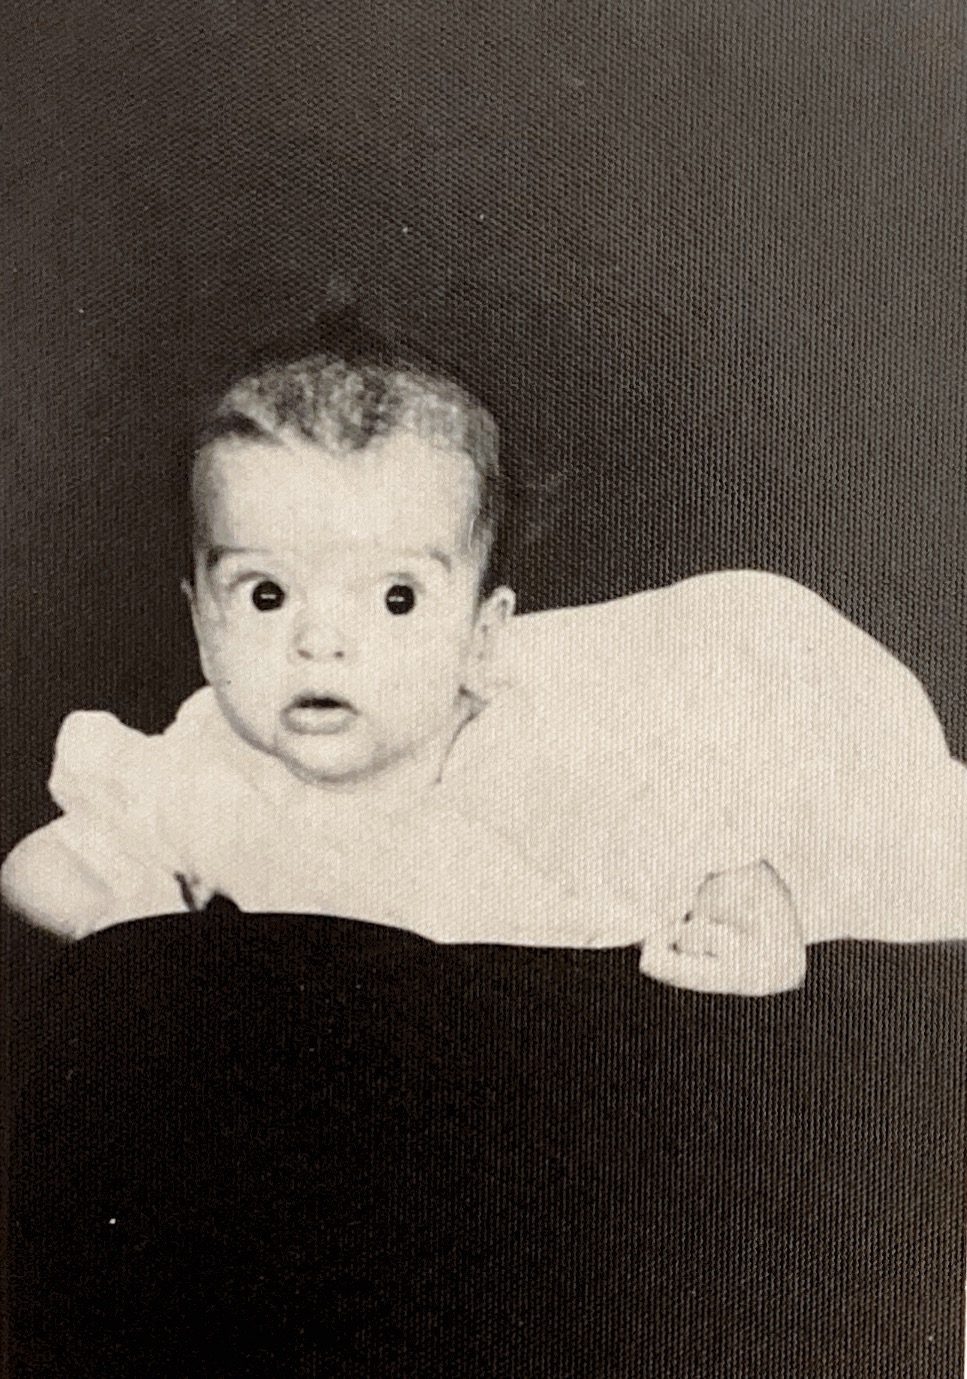 My mother as an infant. 1945. This is the only photo we have of her. 